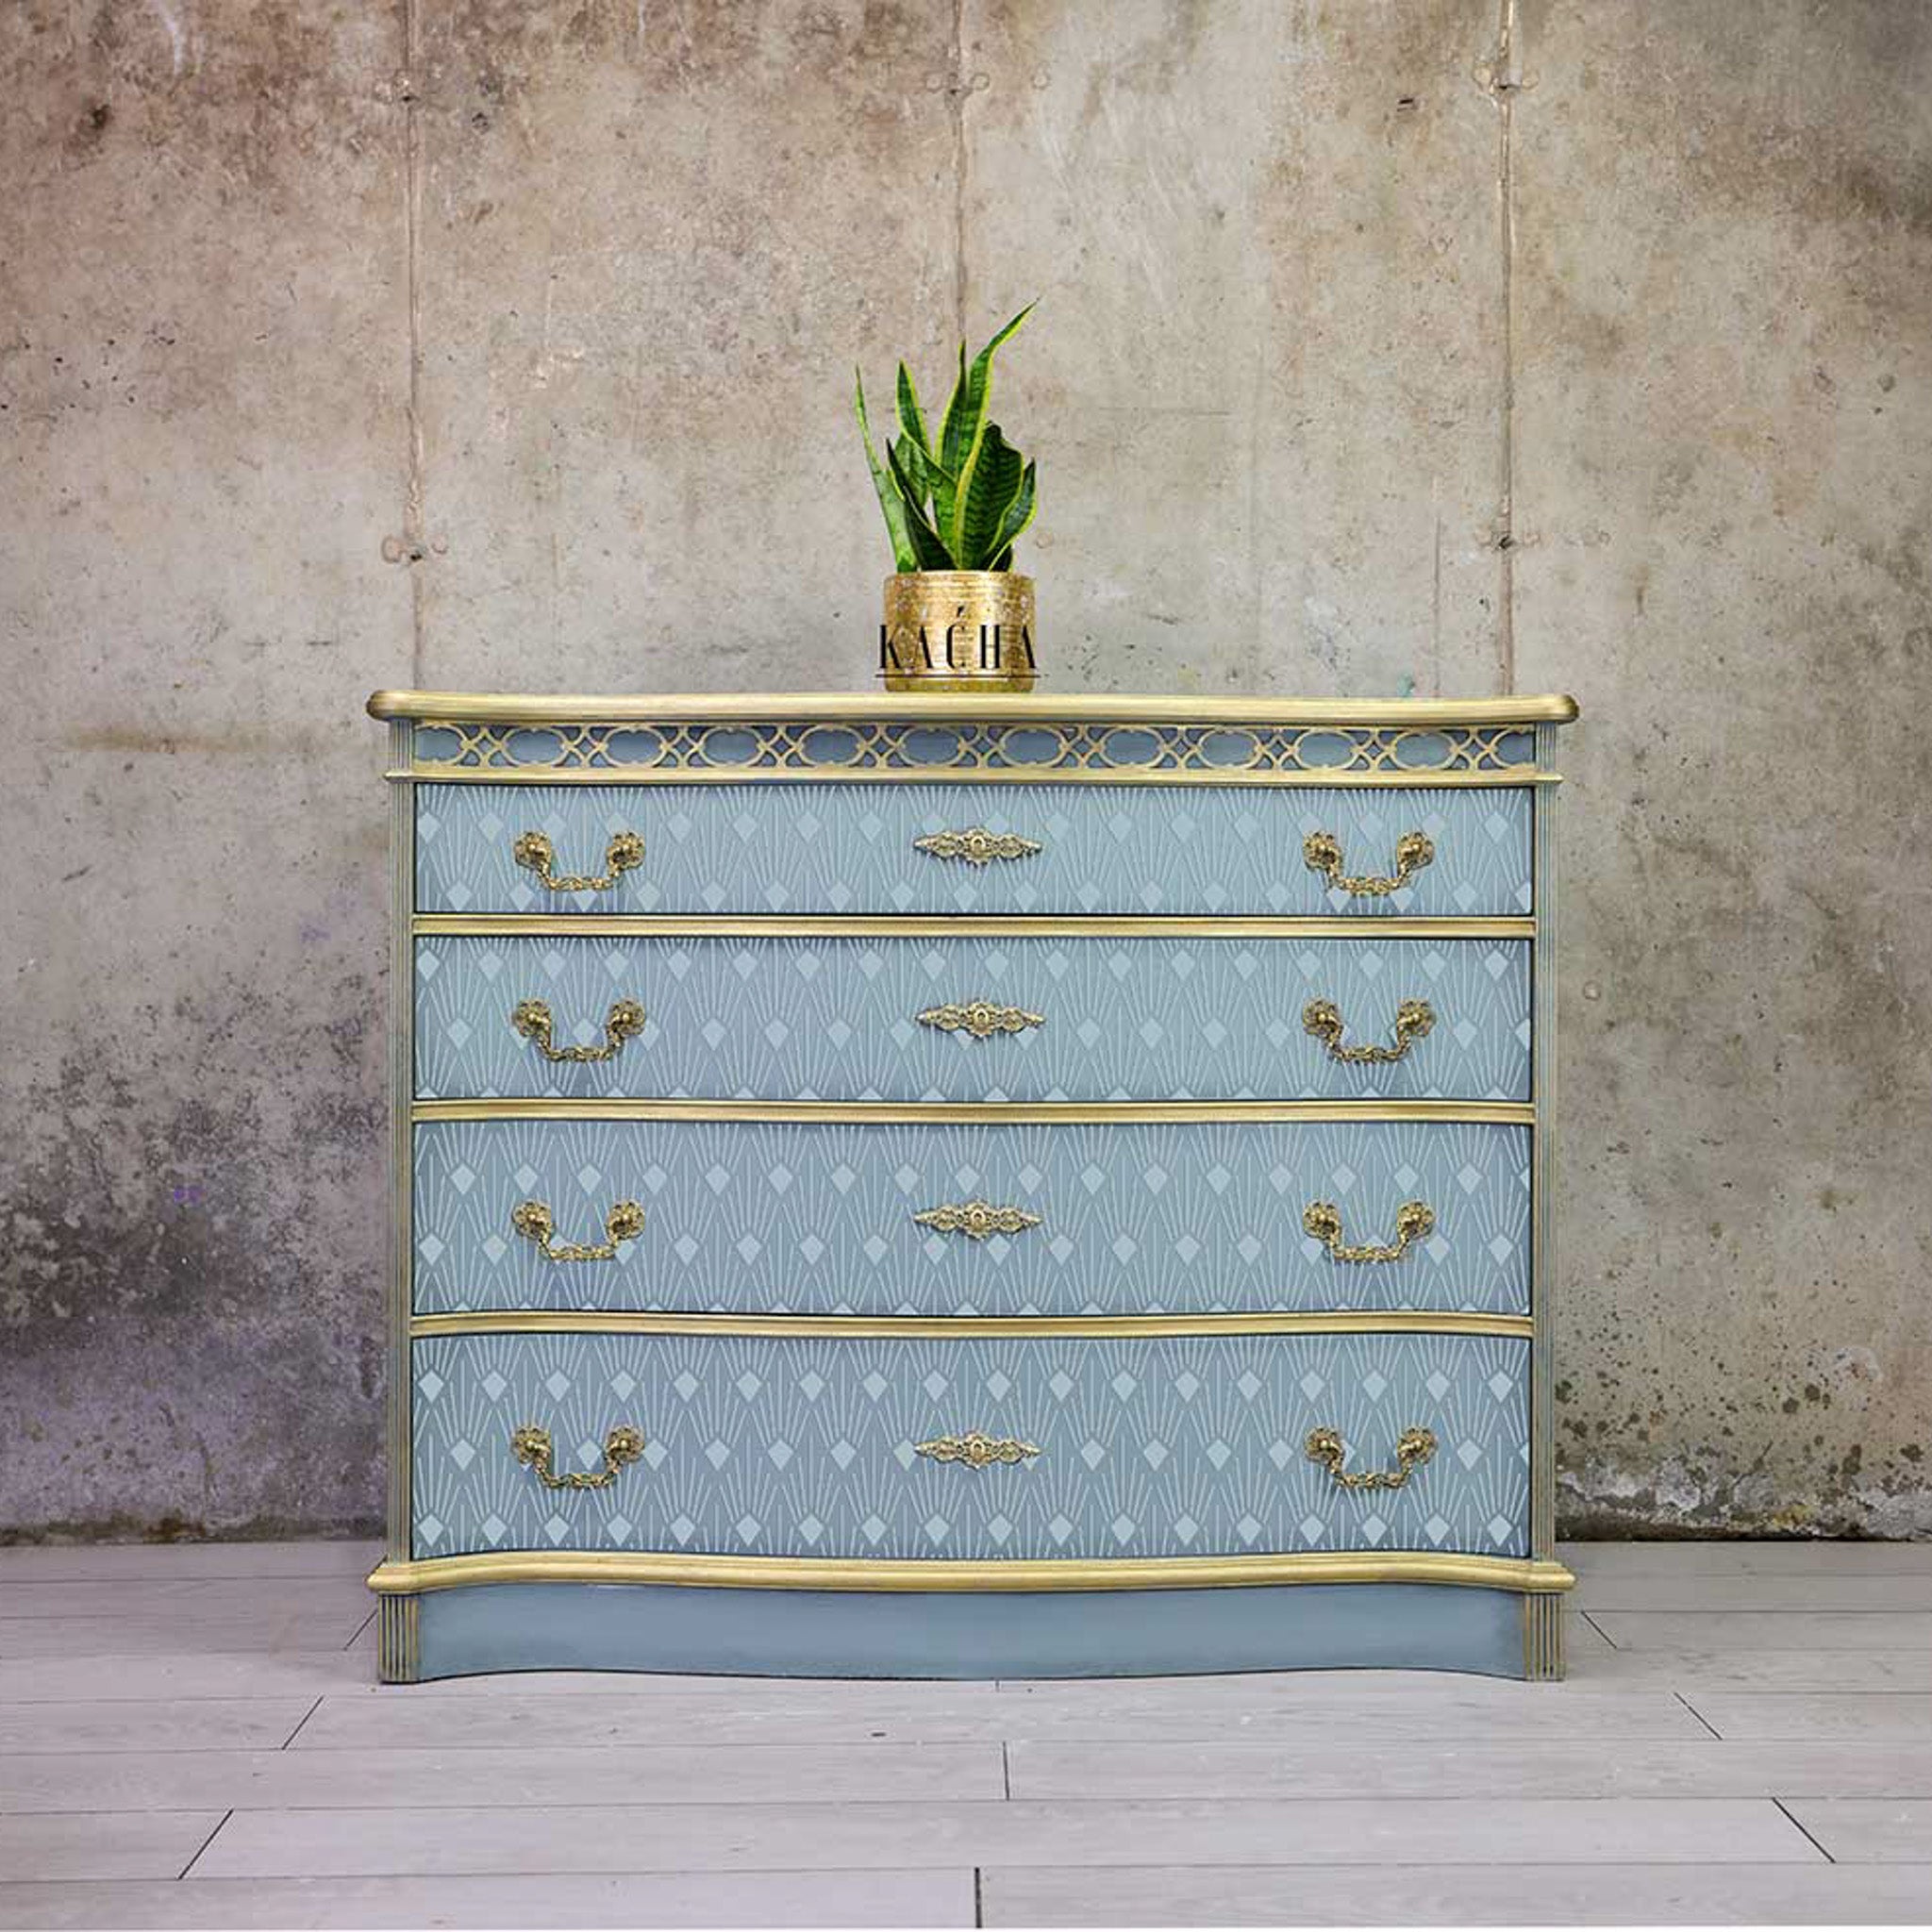 A 4-drawer dresser painted light blue with gold accents features ReDesign with Prima's Sunlit Diamonds stencil in an even lighter blue on its drawers.